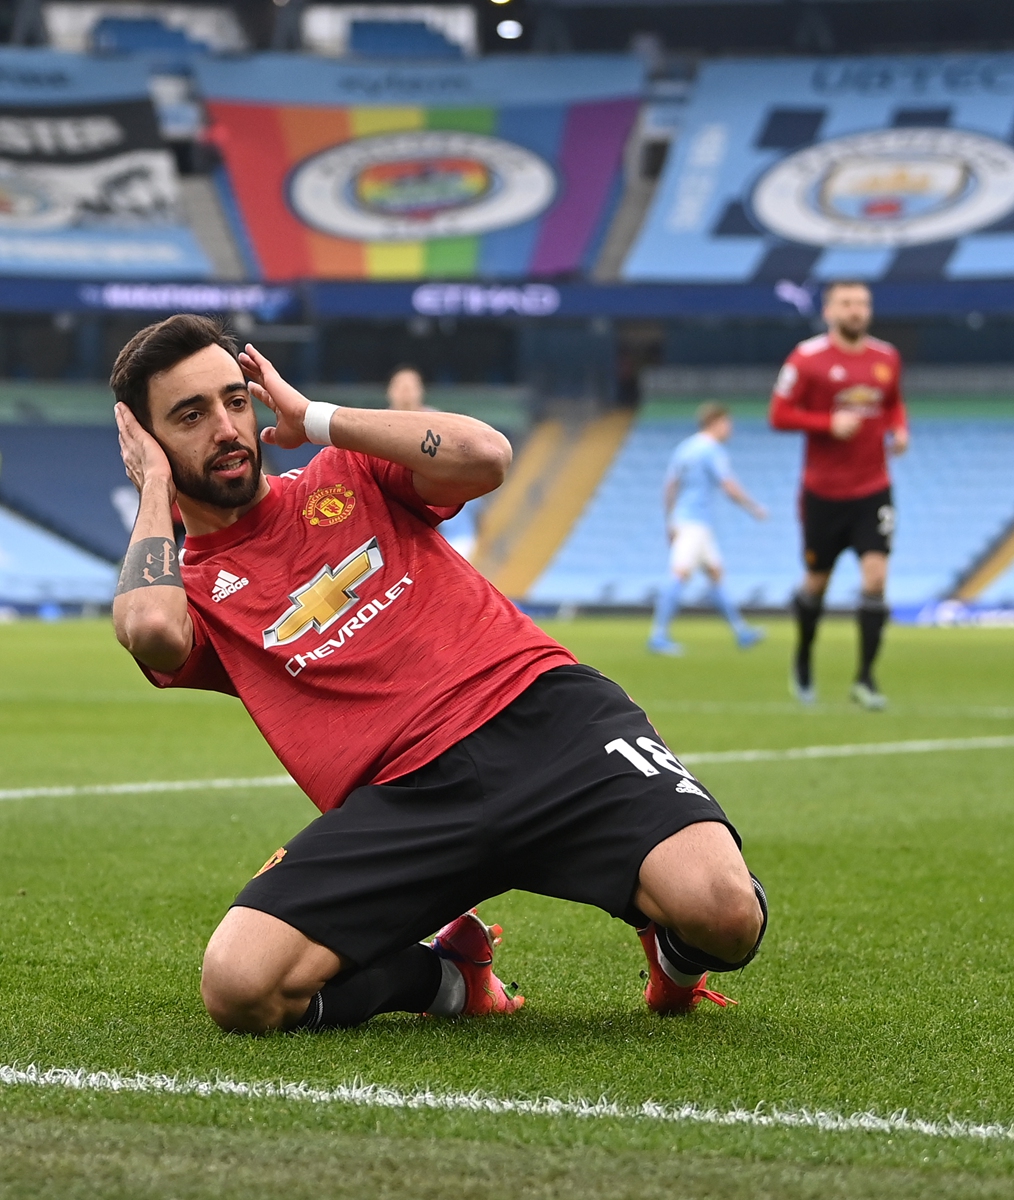 Manchester United's Bruno Fernandes celebrates scoring against Manchester City on Sunday in Manchester, England. Photo: VCG